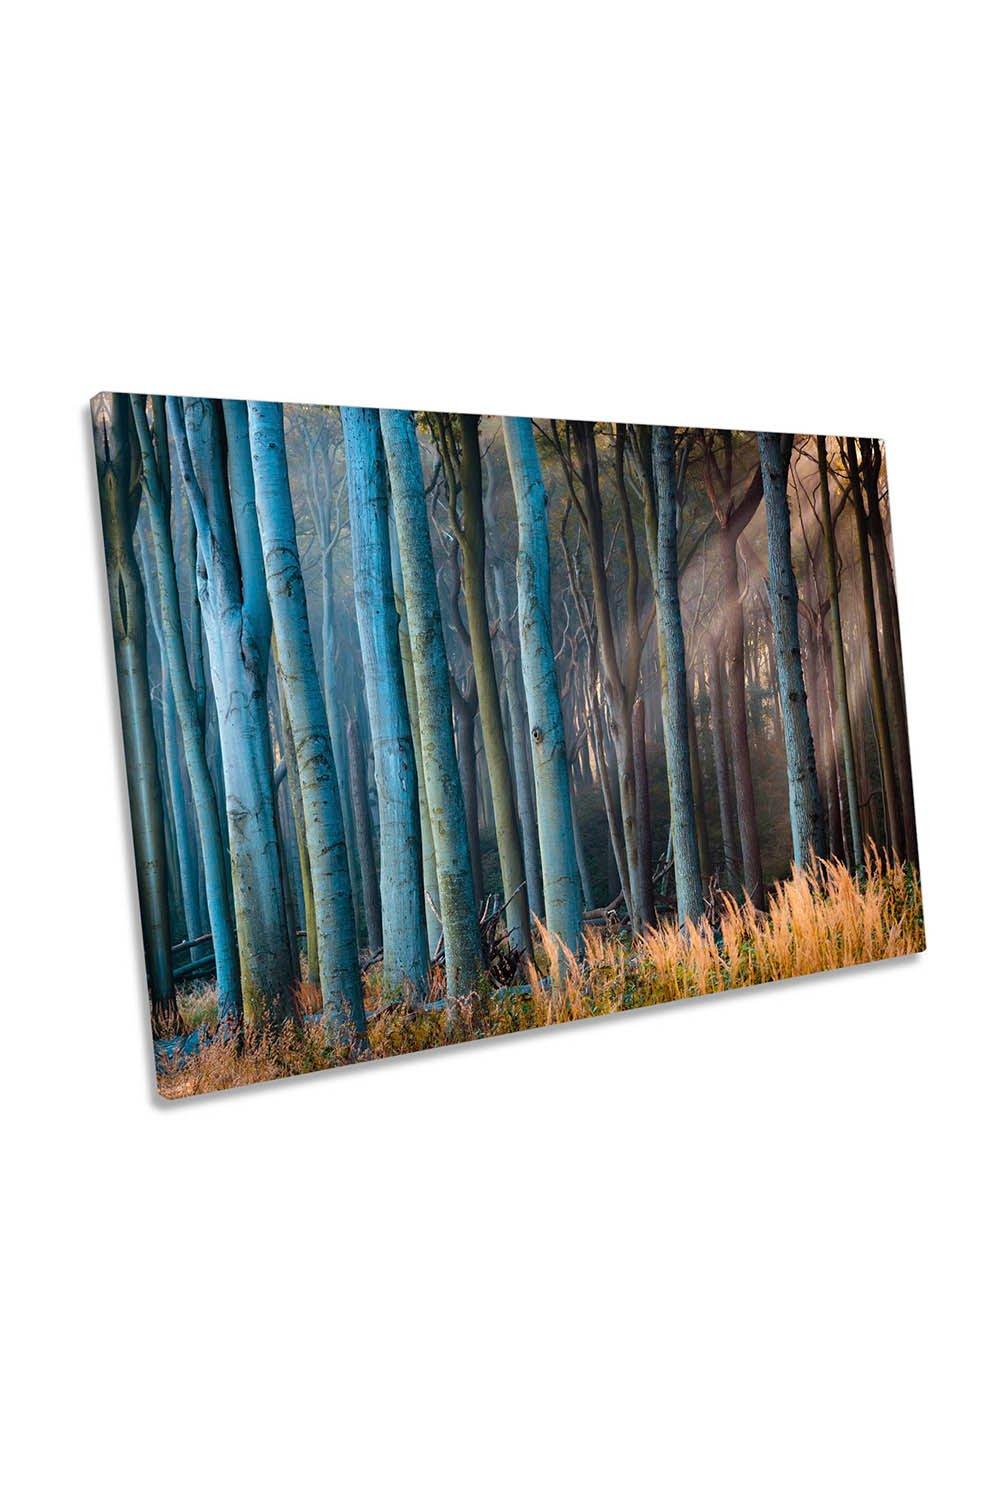 Light in the Woods Forest Trees Scene Canvas Wall Art Picture Print